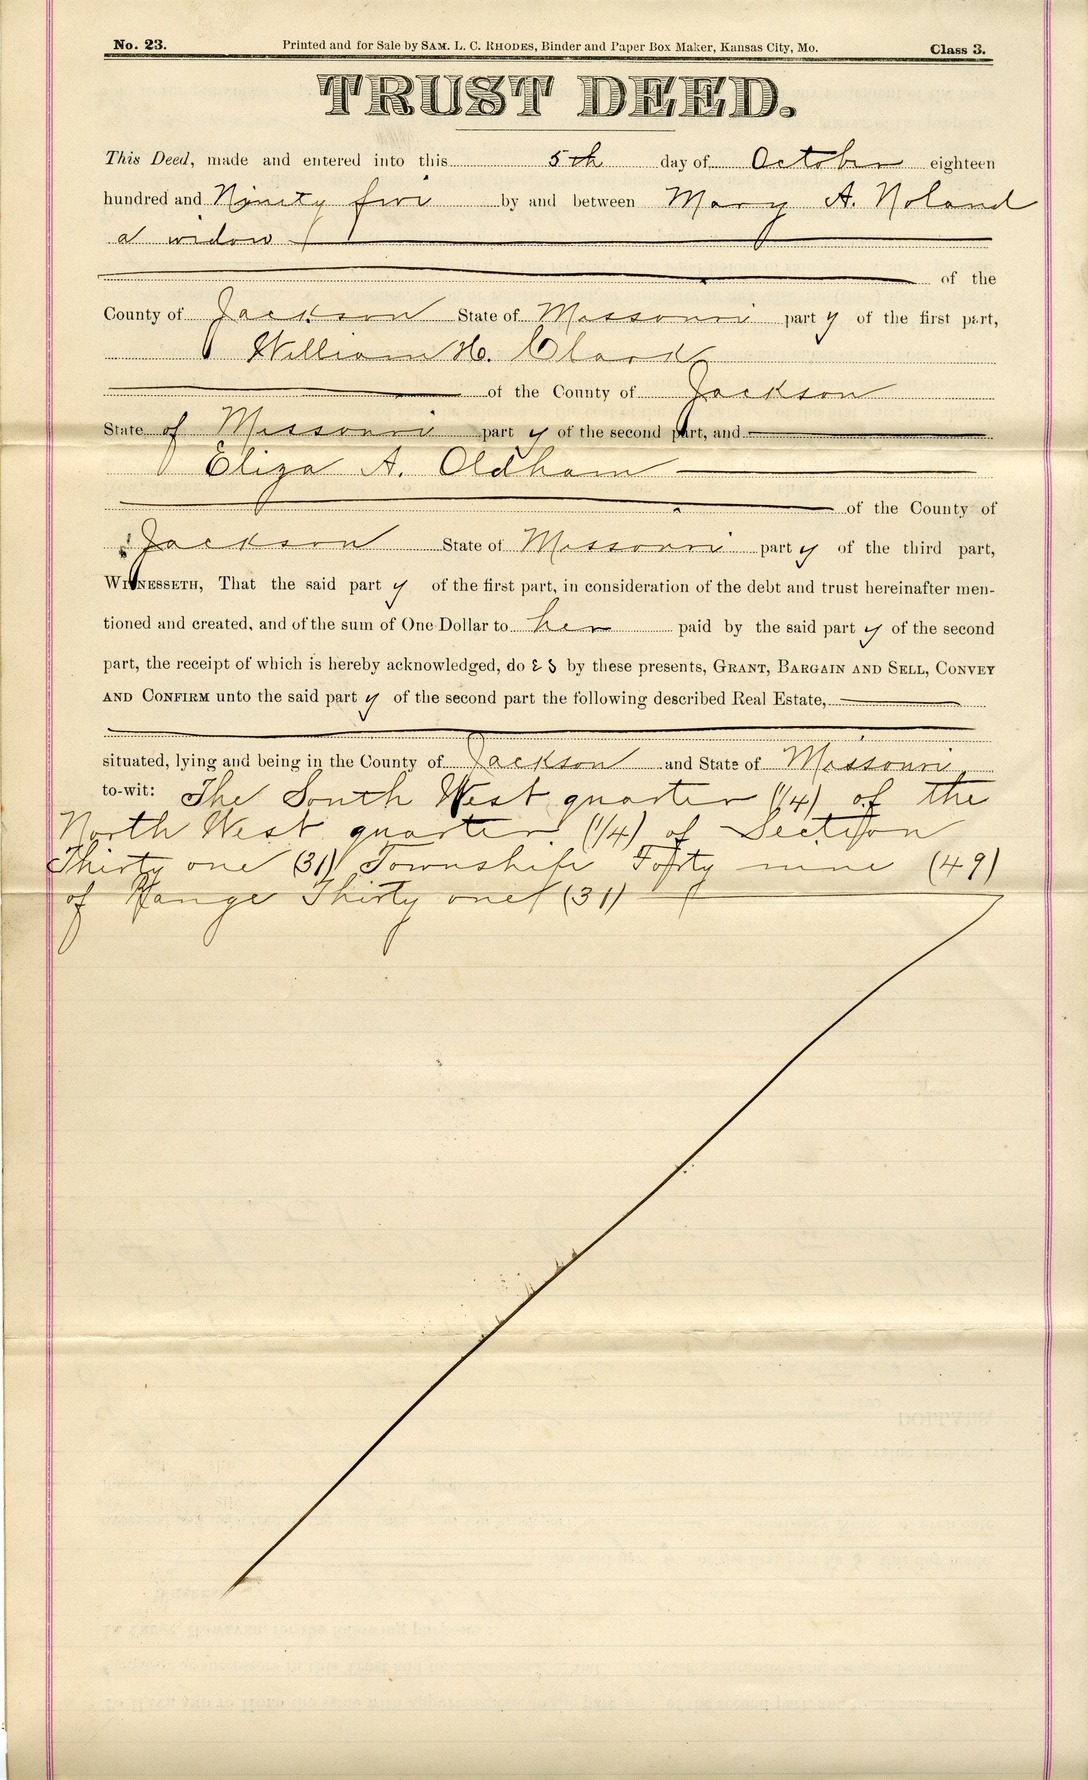 Trust Deed from Mary A. Noland to William H. Clark Jr. for Eliza A. Oldham